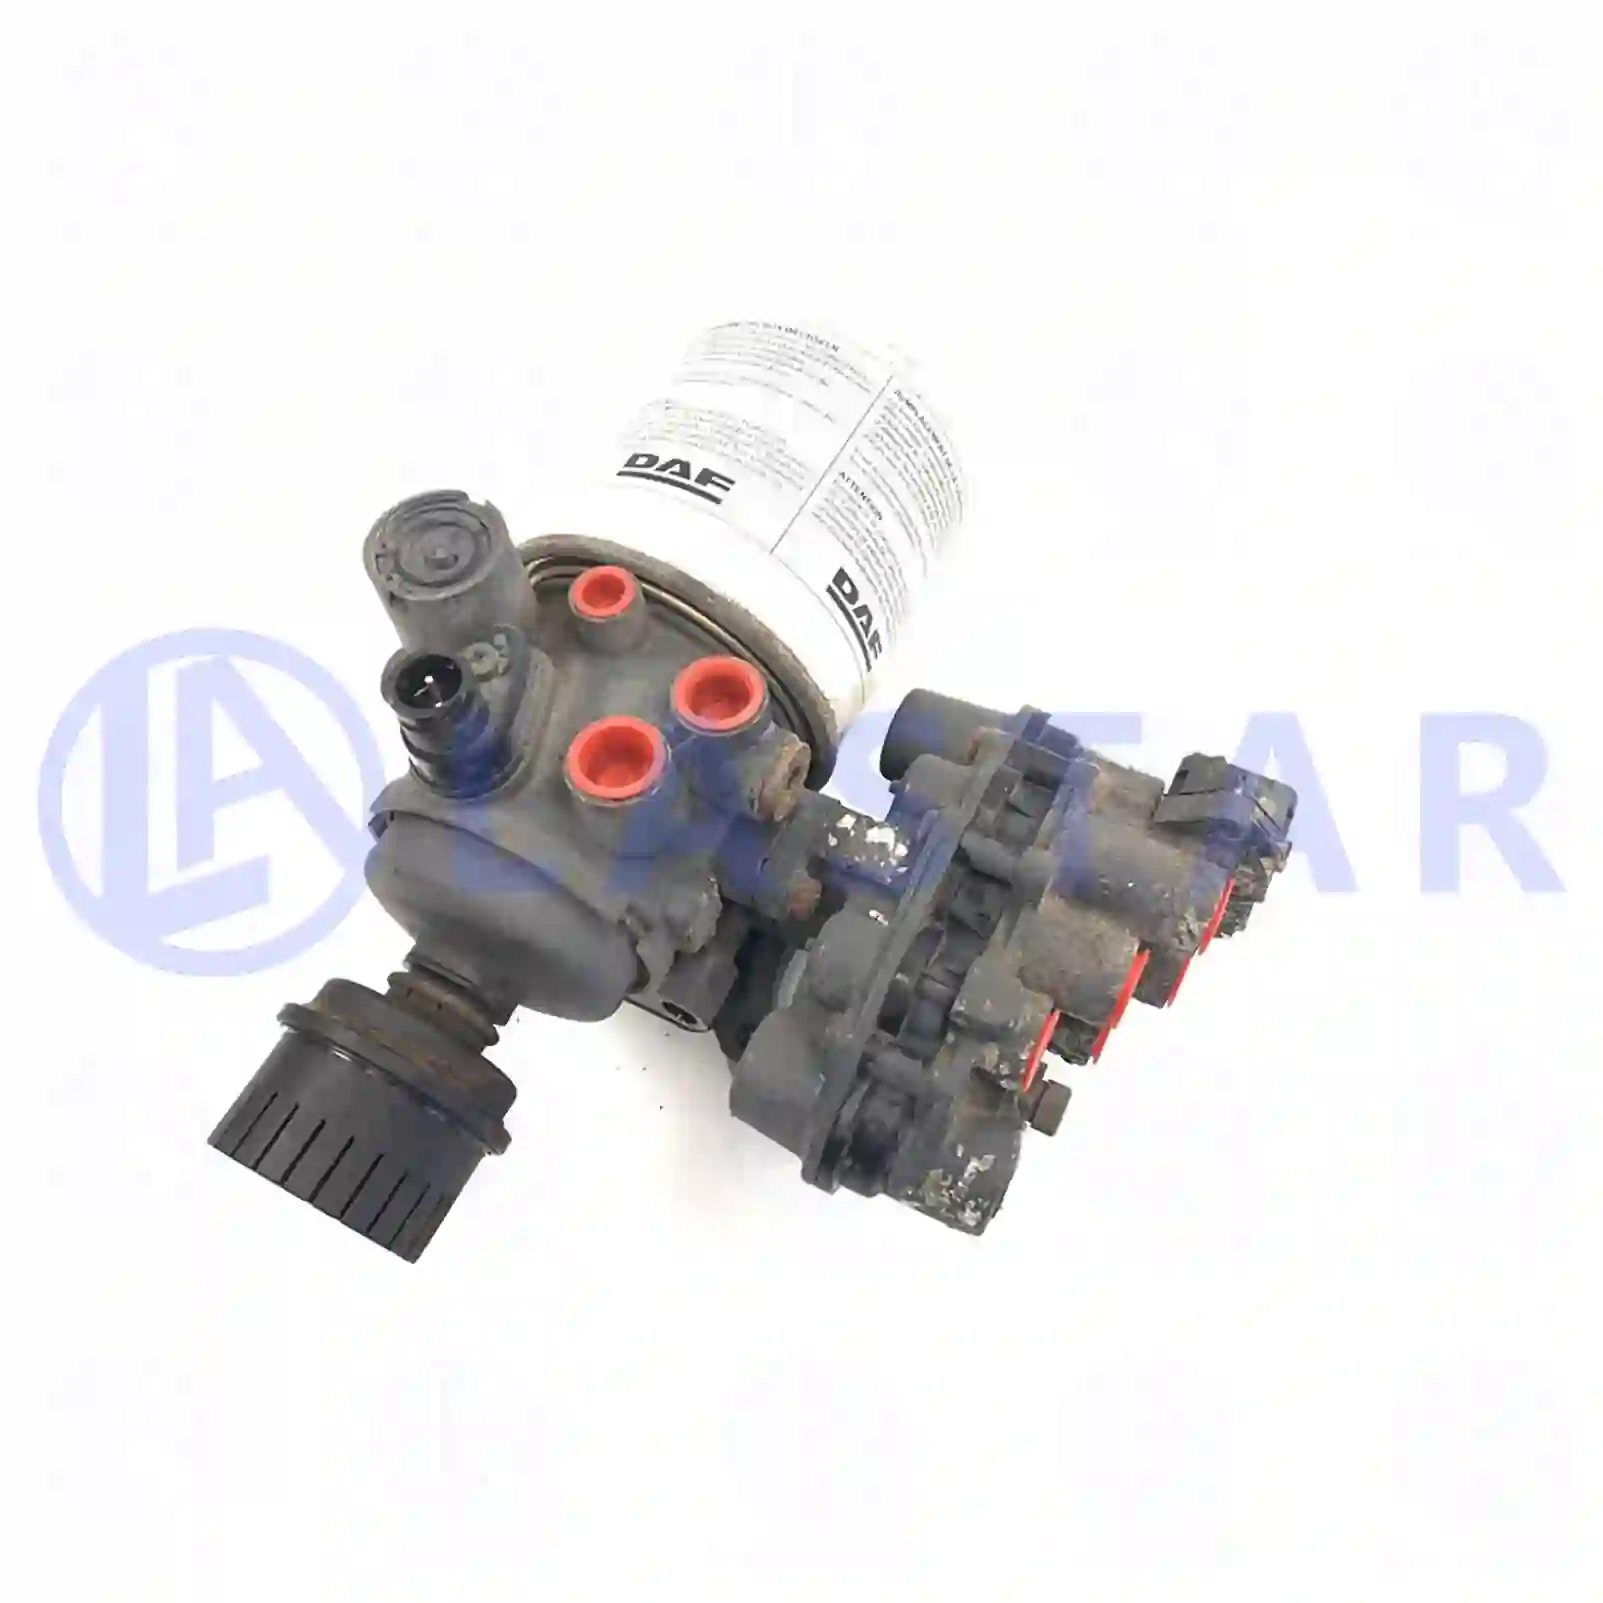 Air dryer, complete with valve, 77716288, 1681571 ||  77716288 Lastar Spare Part | Truck Spare Parts, Auotomotive Spare Parts Air dryer, complete with valve, 77716288, 1681571 ||  77716288 Lastar Spare Part | Truck Spare Parts, Auotomotive Spare Parts